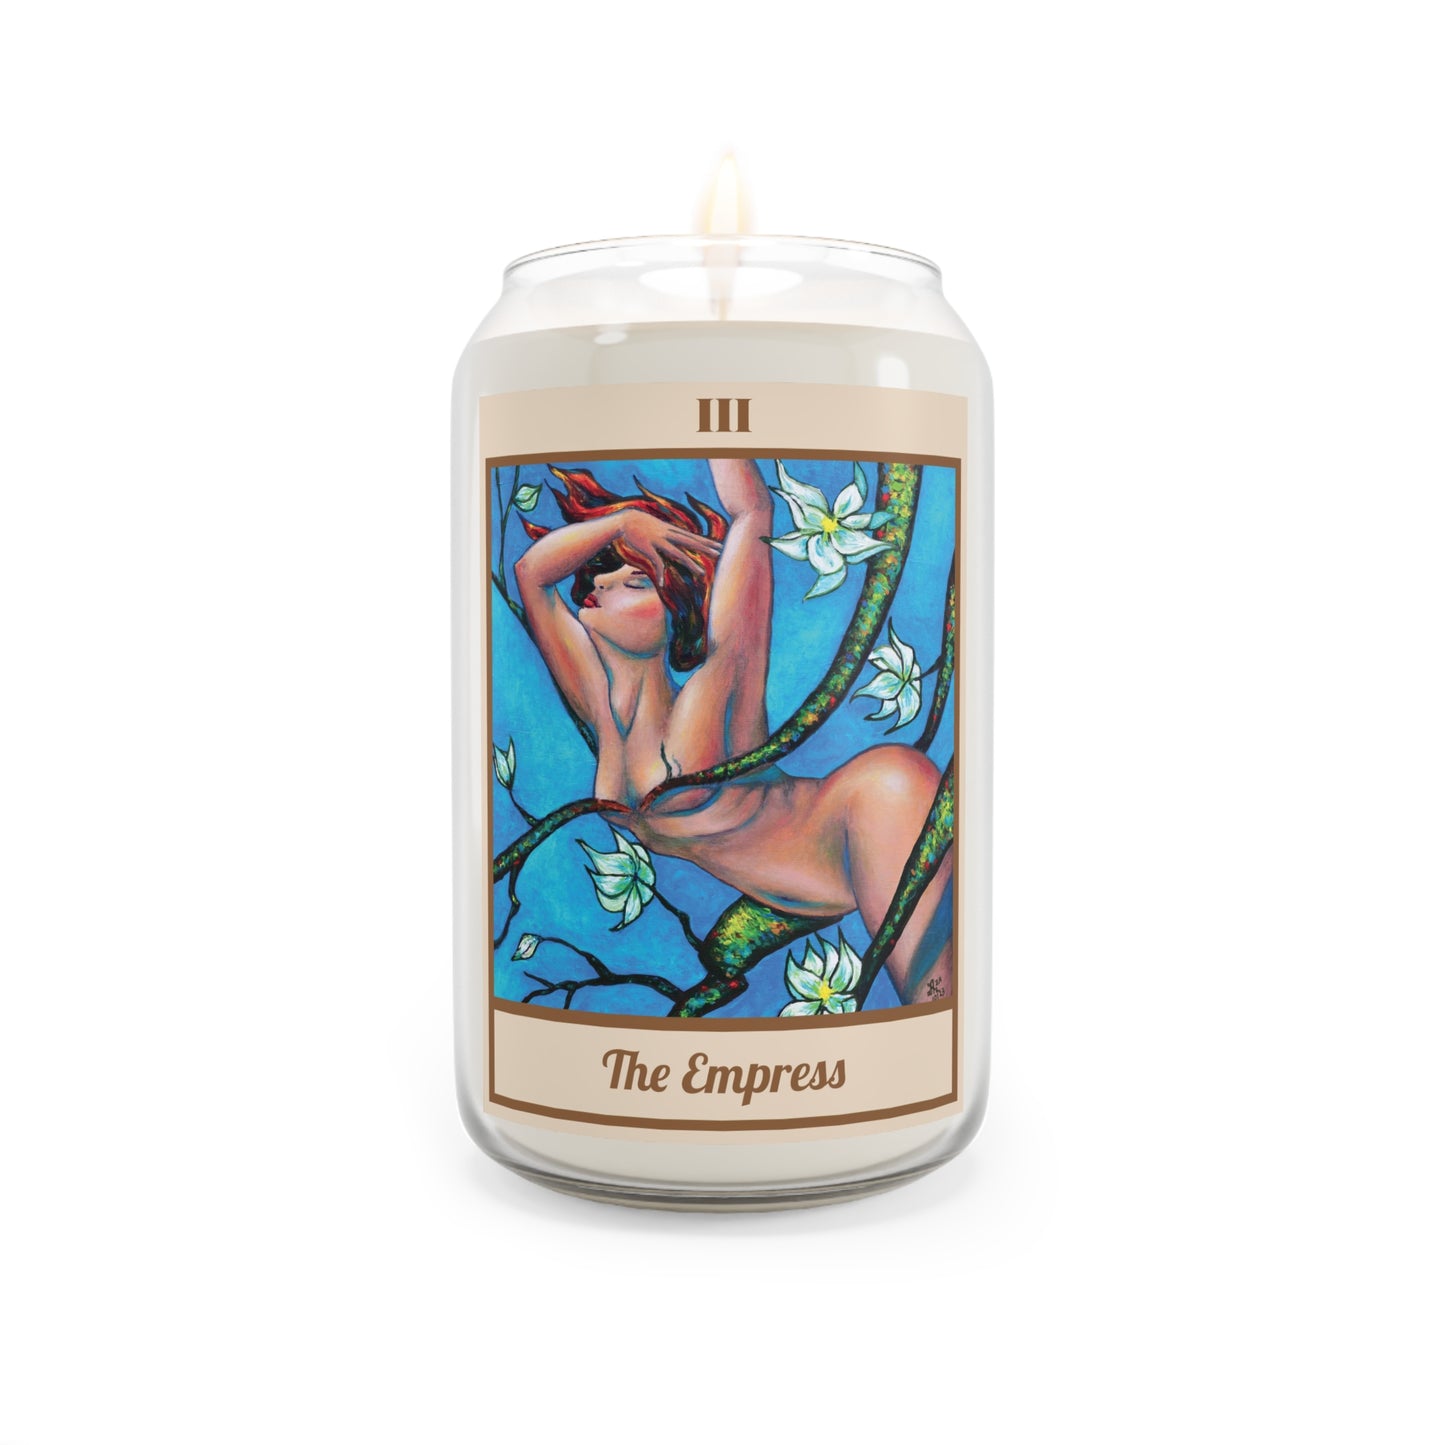 The Empress Tarot Card Scented Candle, 13.75oz